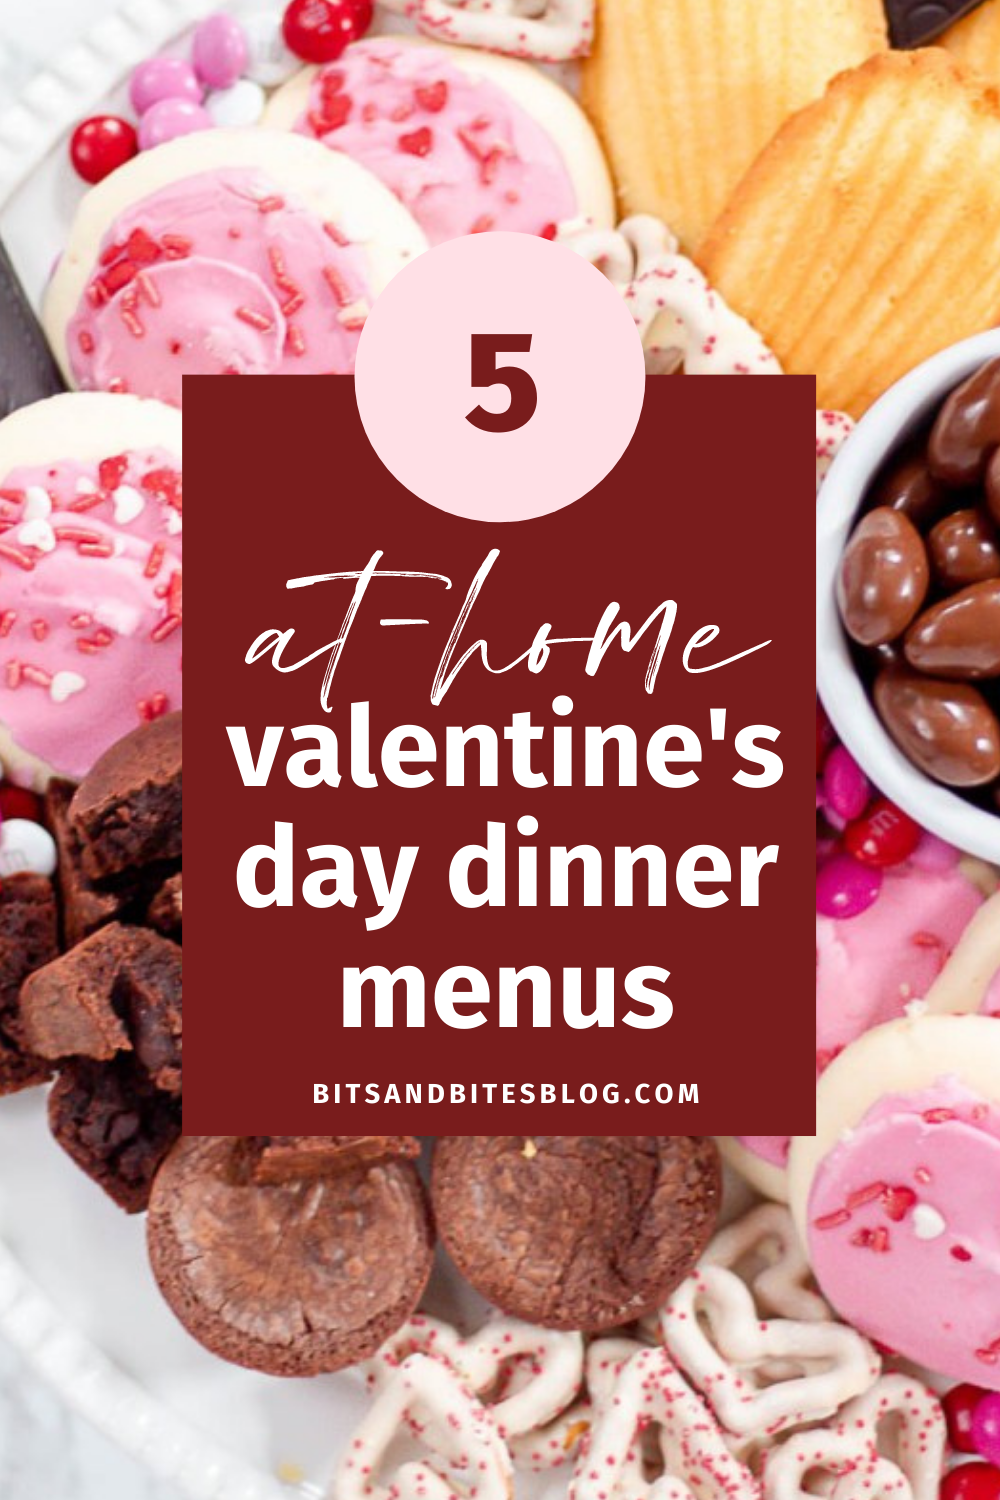 these at-home valentines day dinner ideas are the perfect way to make valentines day special from home! from a pasta dinner for two to a French-inspired dinner for two, there are so many at-home date night dinner ideas!